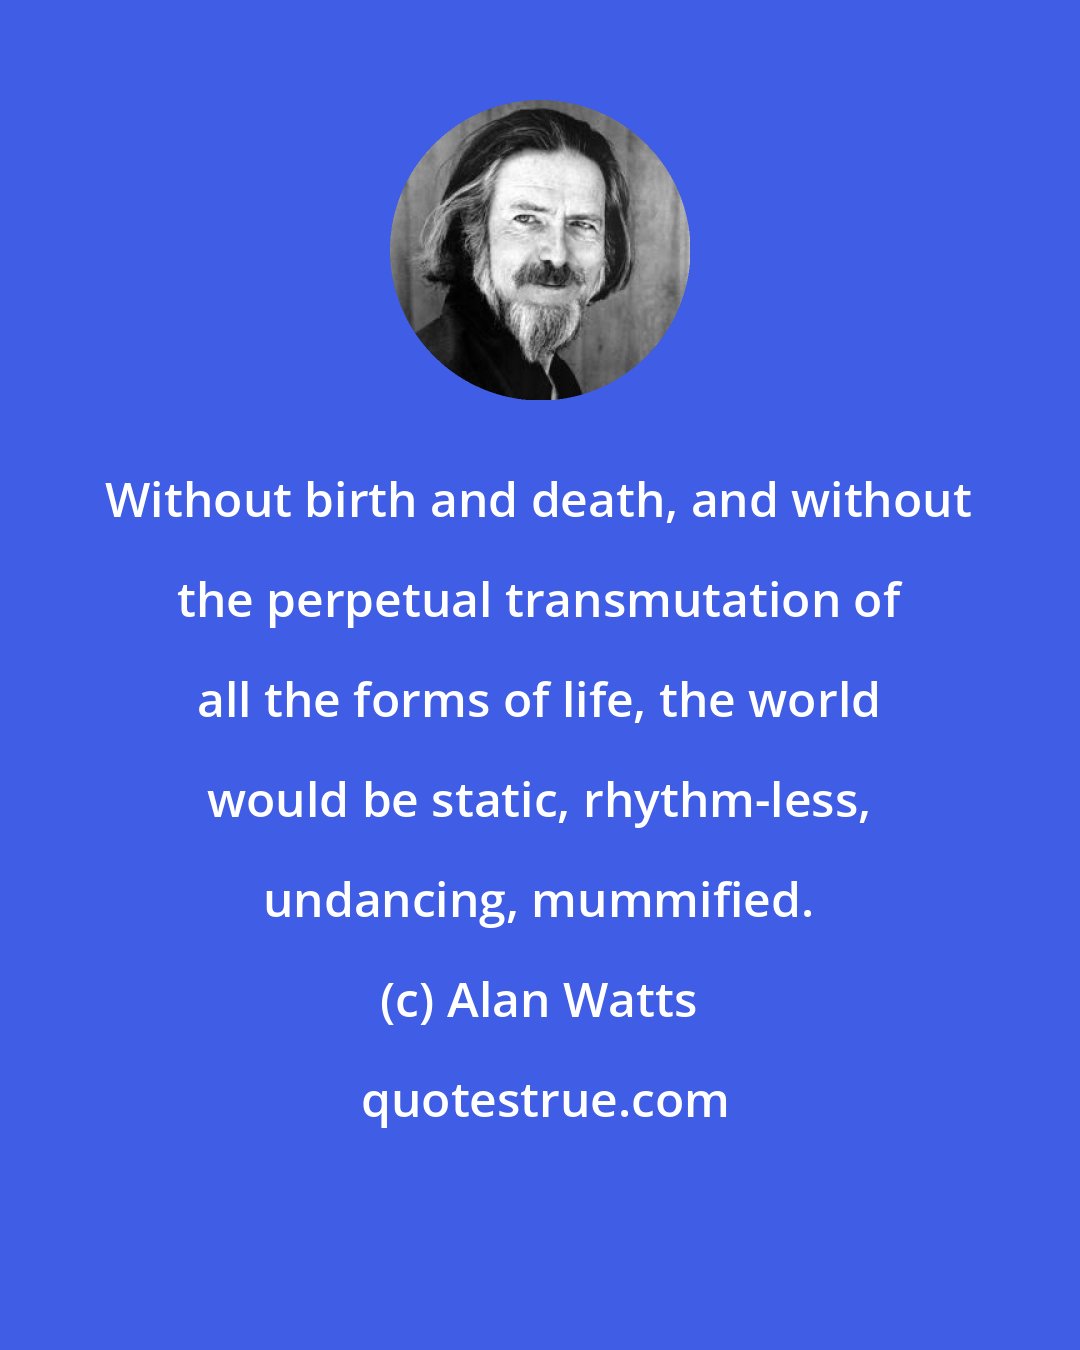 Alan Watts: Without birth and death, and without the perpetual transmutation of all the forms of life, the world would be static, rhythm-less, undancing, mummified.